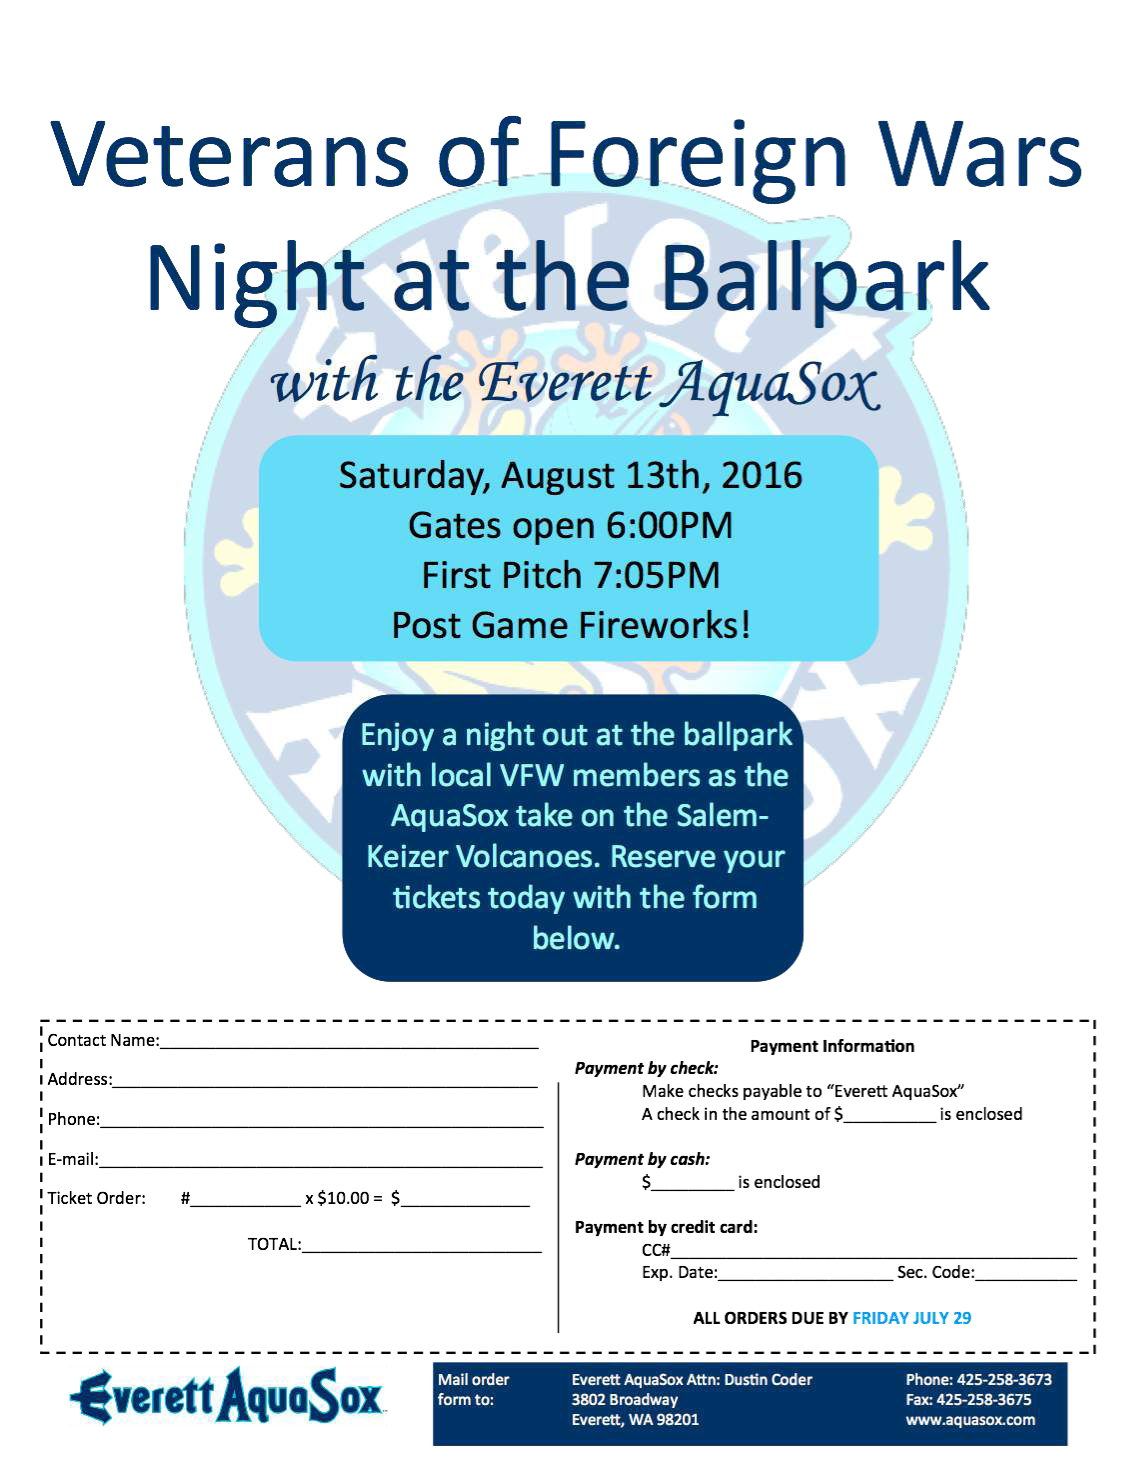 Veterans of Foreign Wars Night at the Ball park with the Everett Aquasox